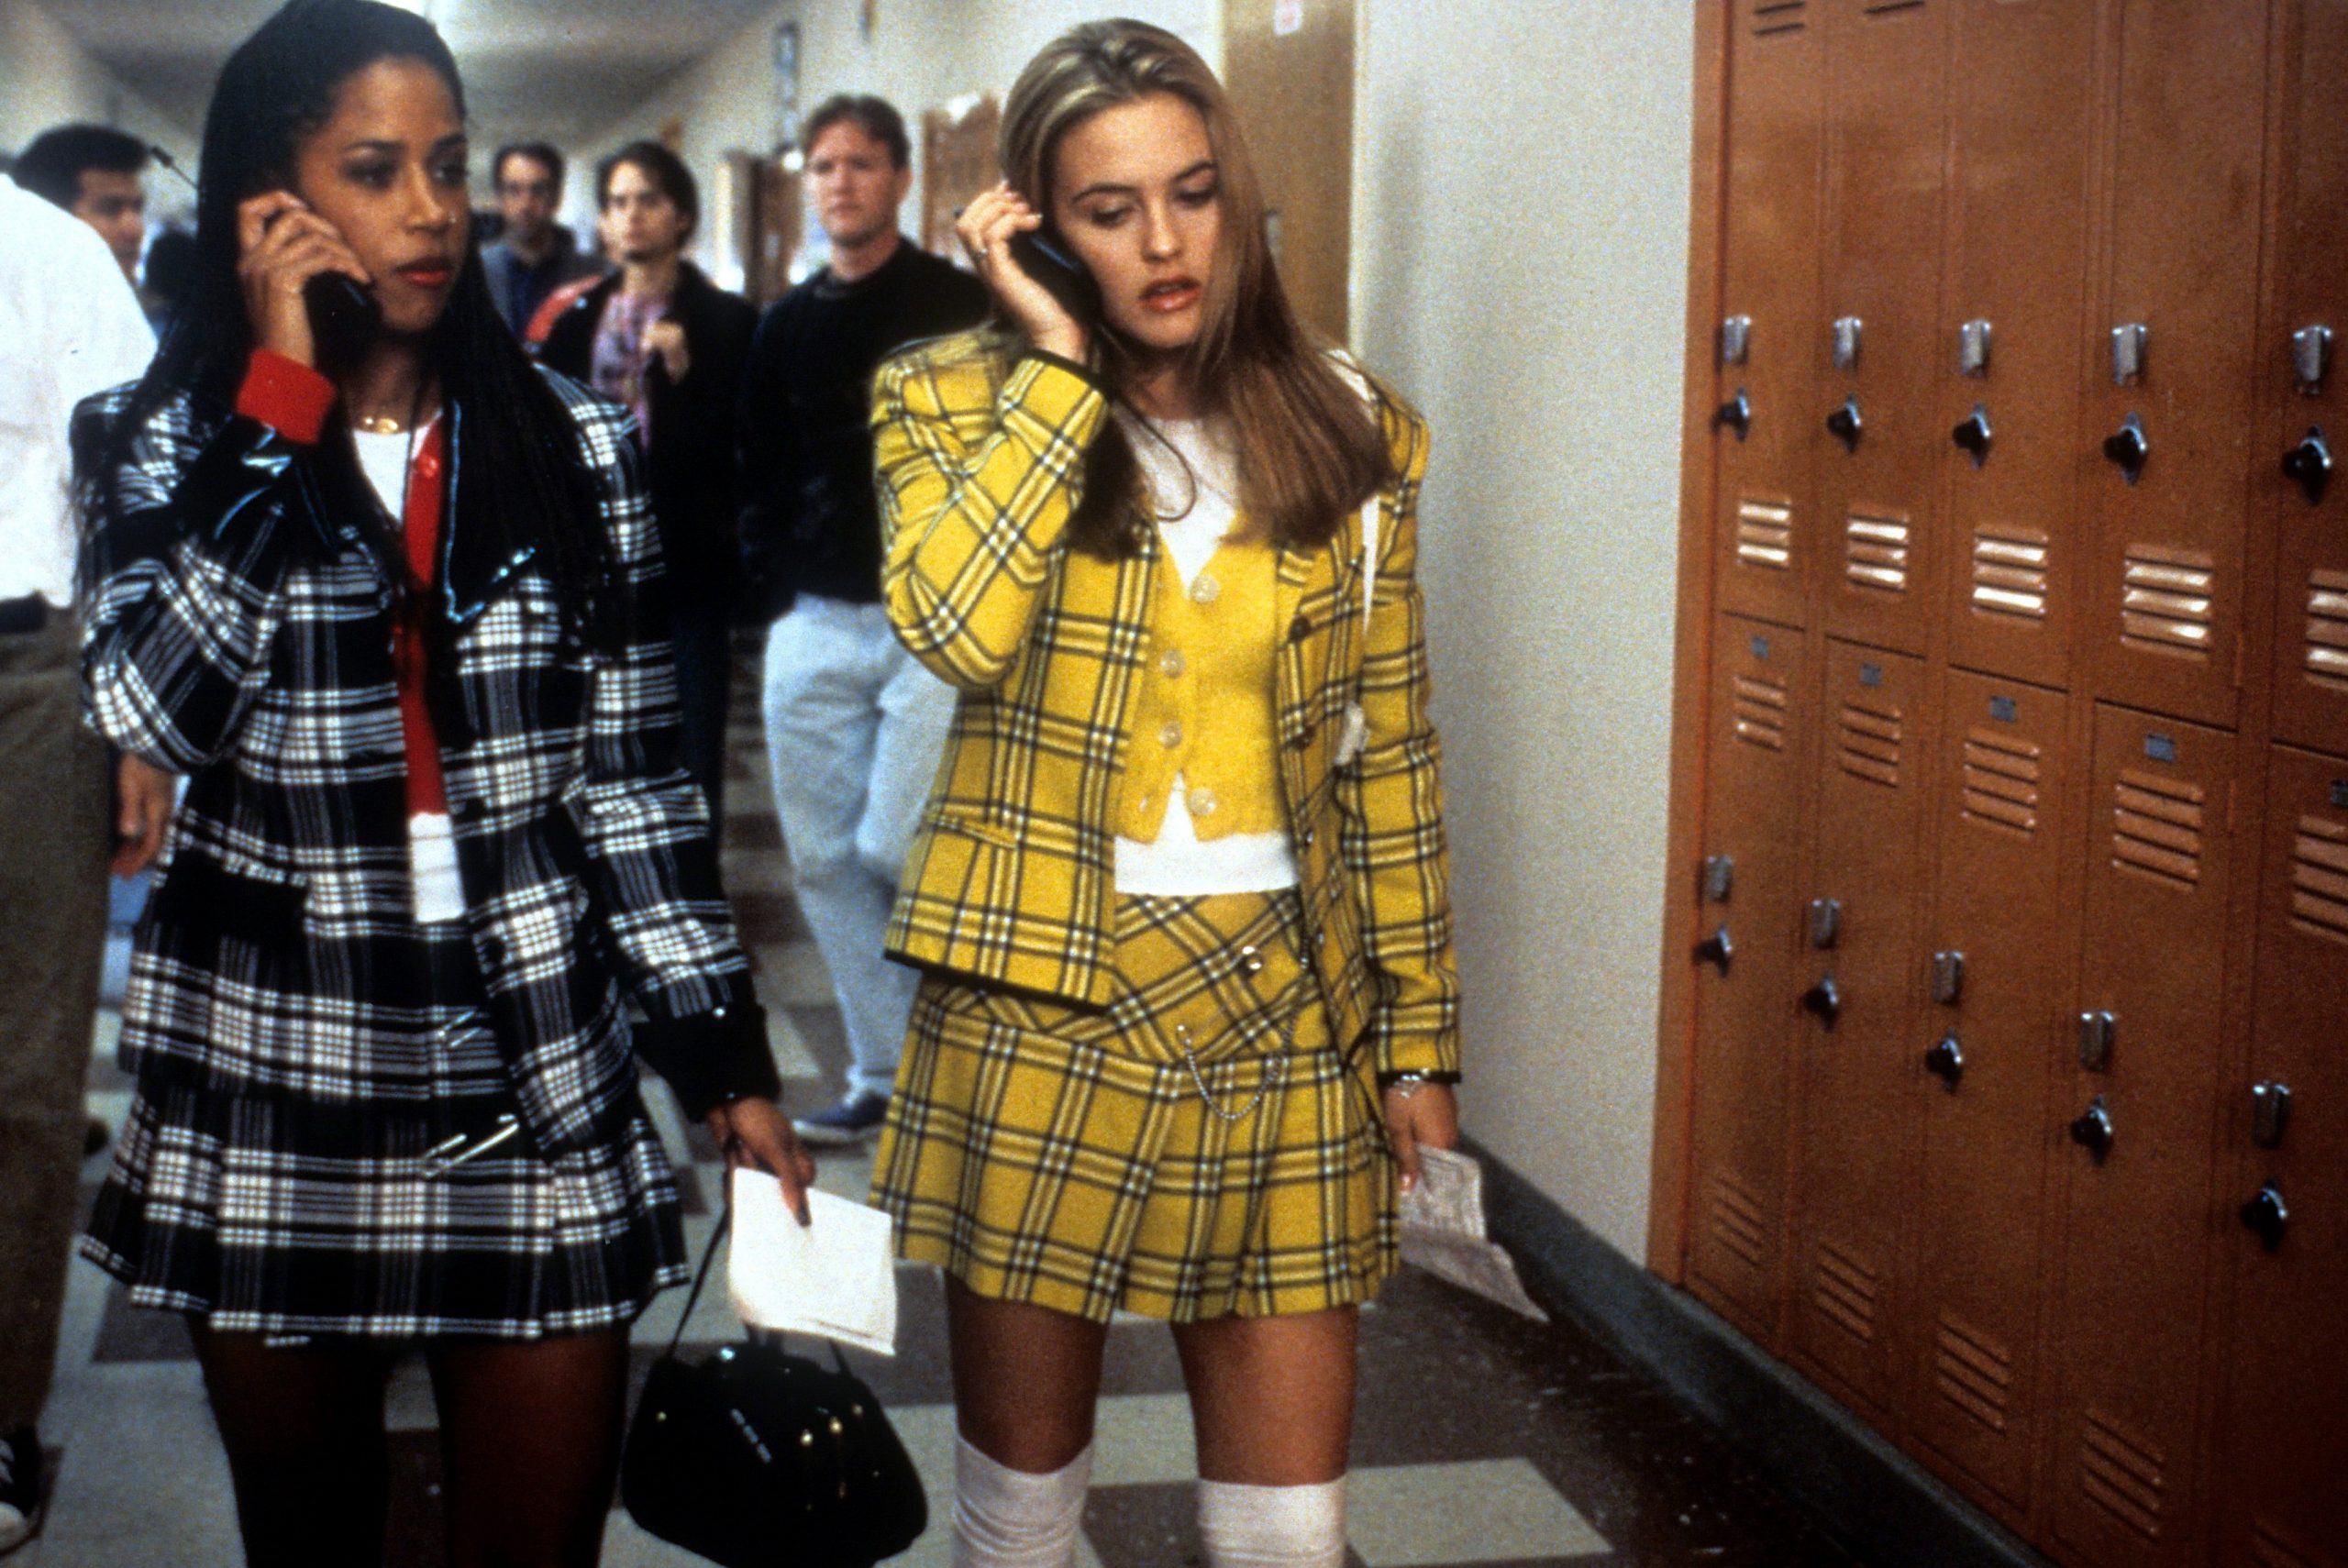 Alicia Silverstone wearing her iconic yellow tartan outfit in the movie "Clueless"